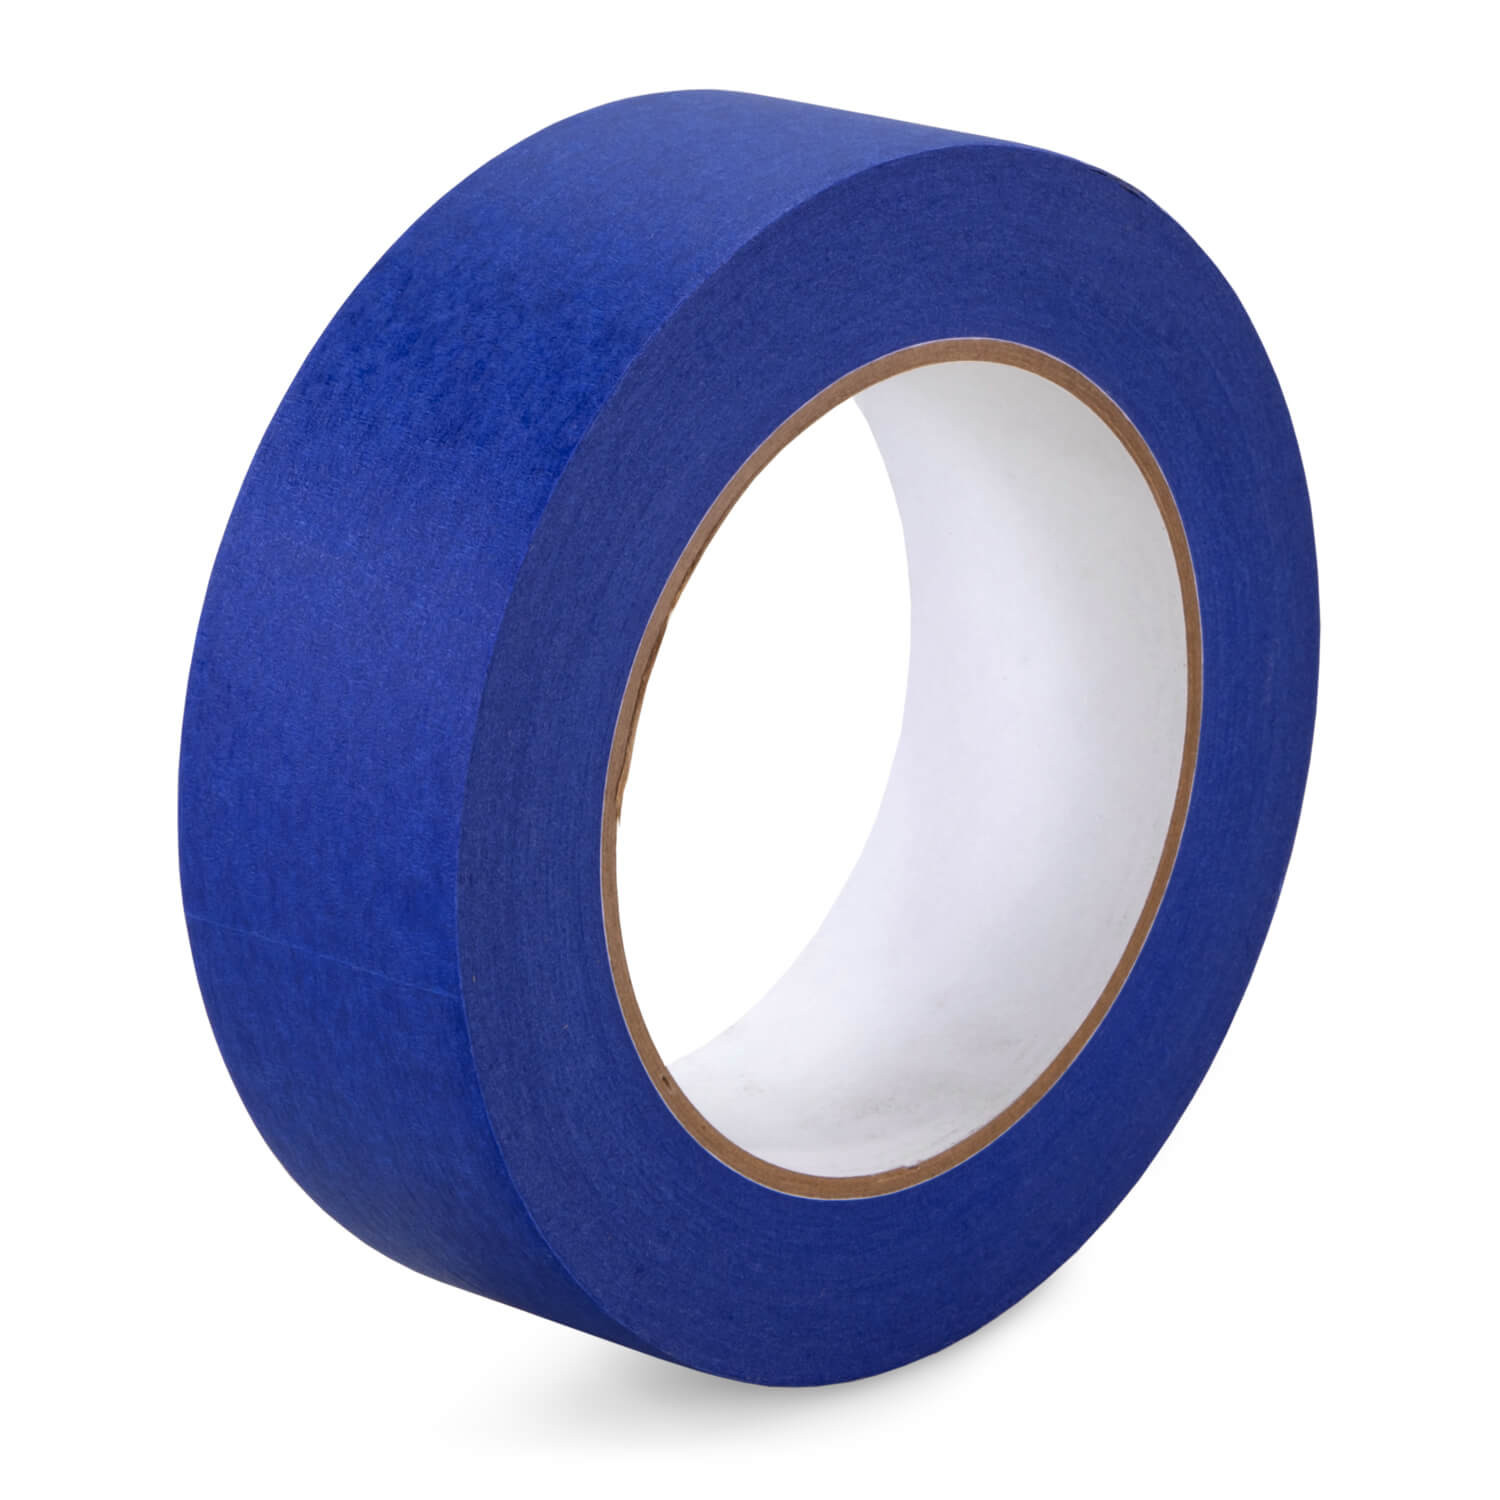 1 1/2 x 60 yards White Masking Tape for General Purpose, Natural Rubber  buy in stock in U.S. in IDL Packaging